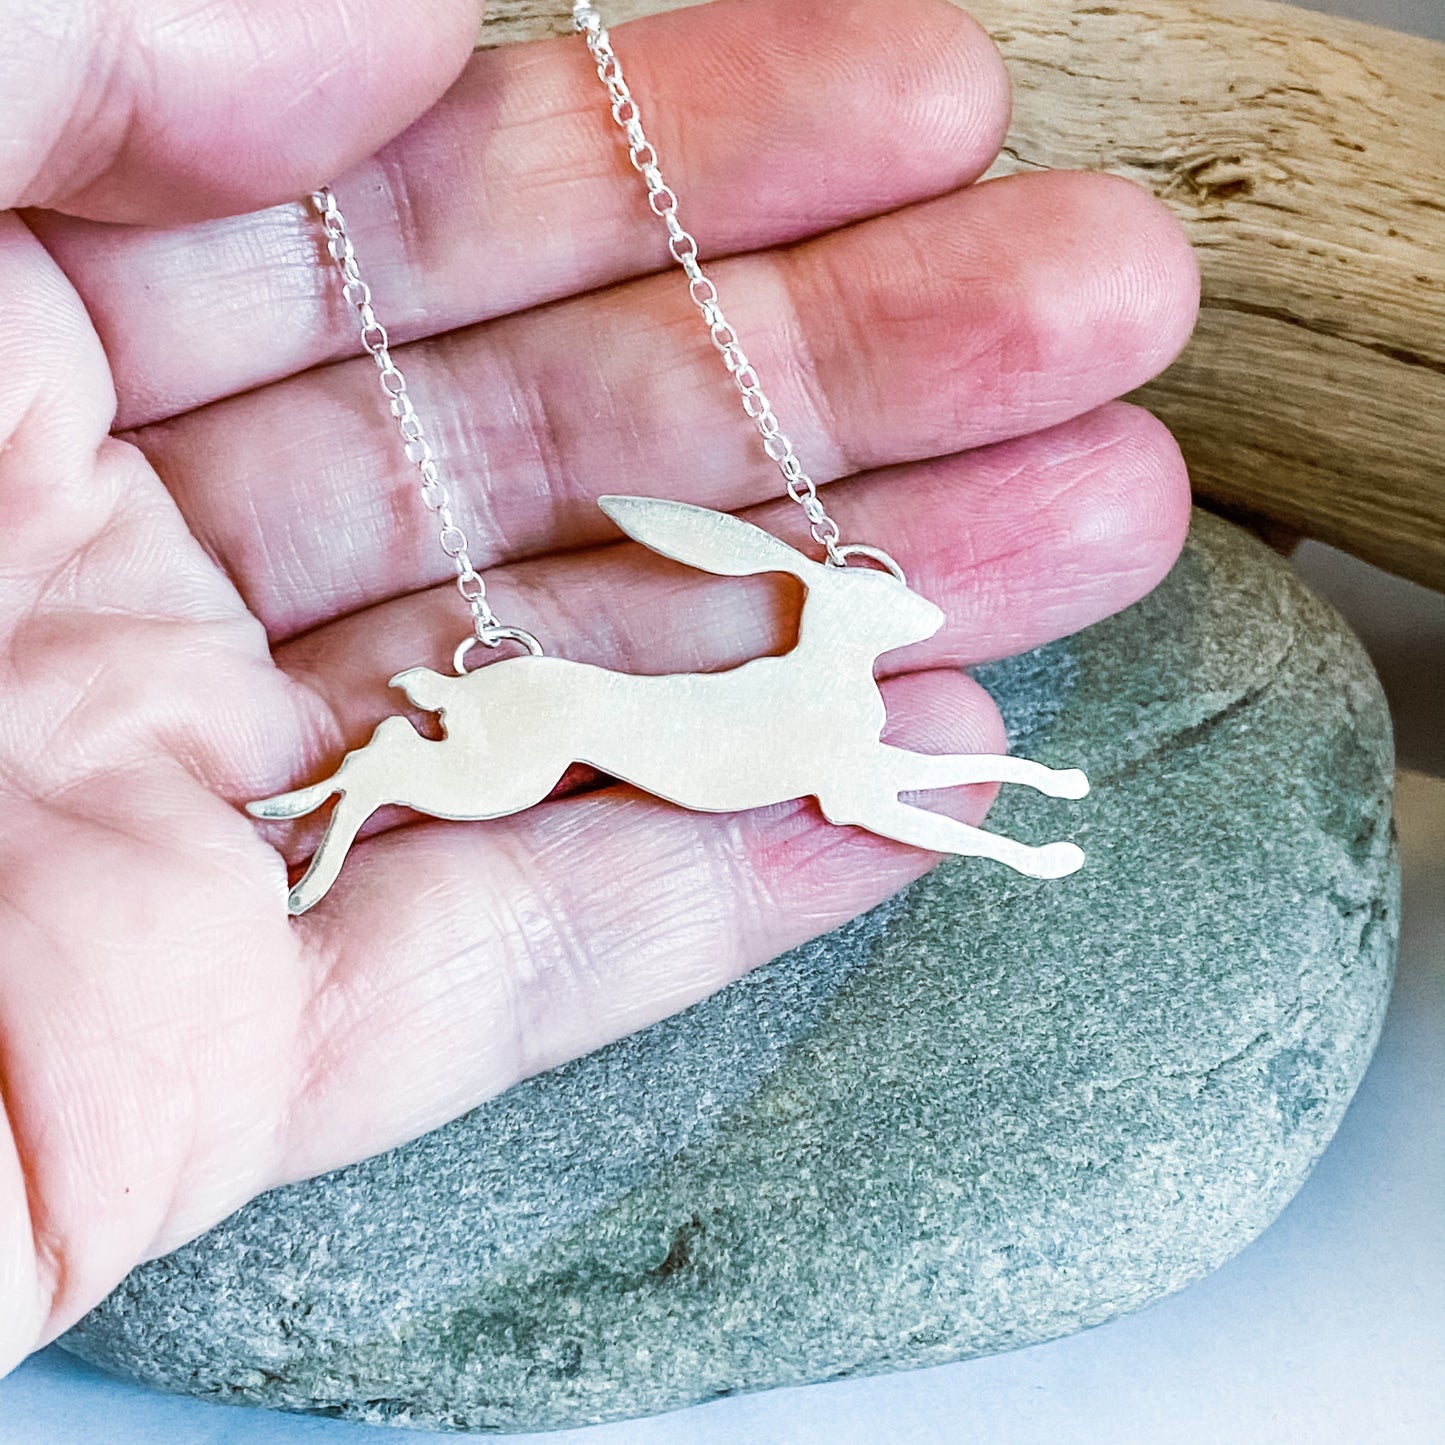 Leaping Hare, Necklace, Small Dog Silver